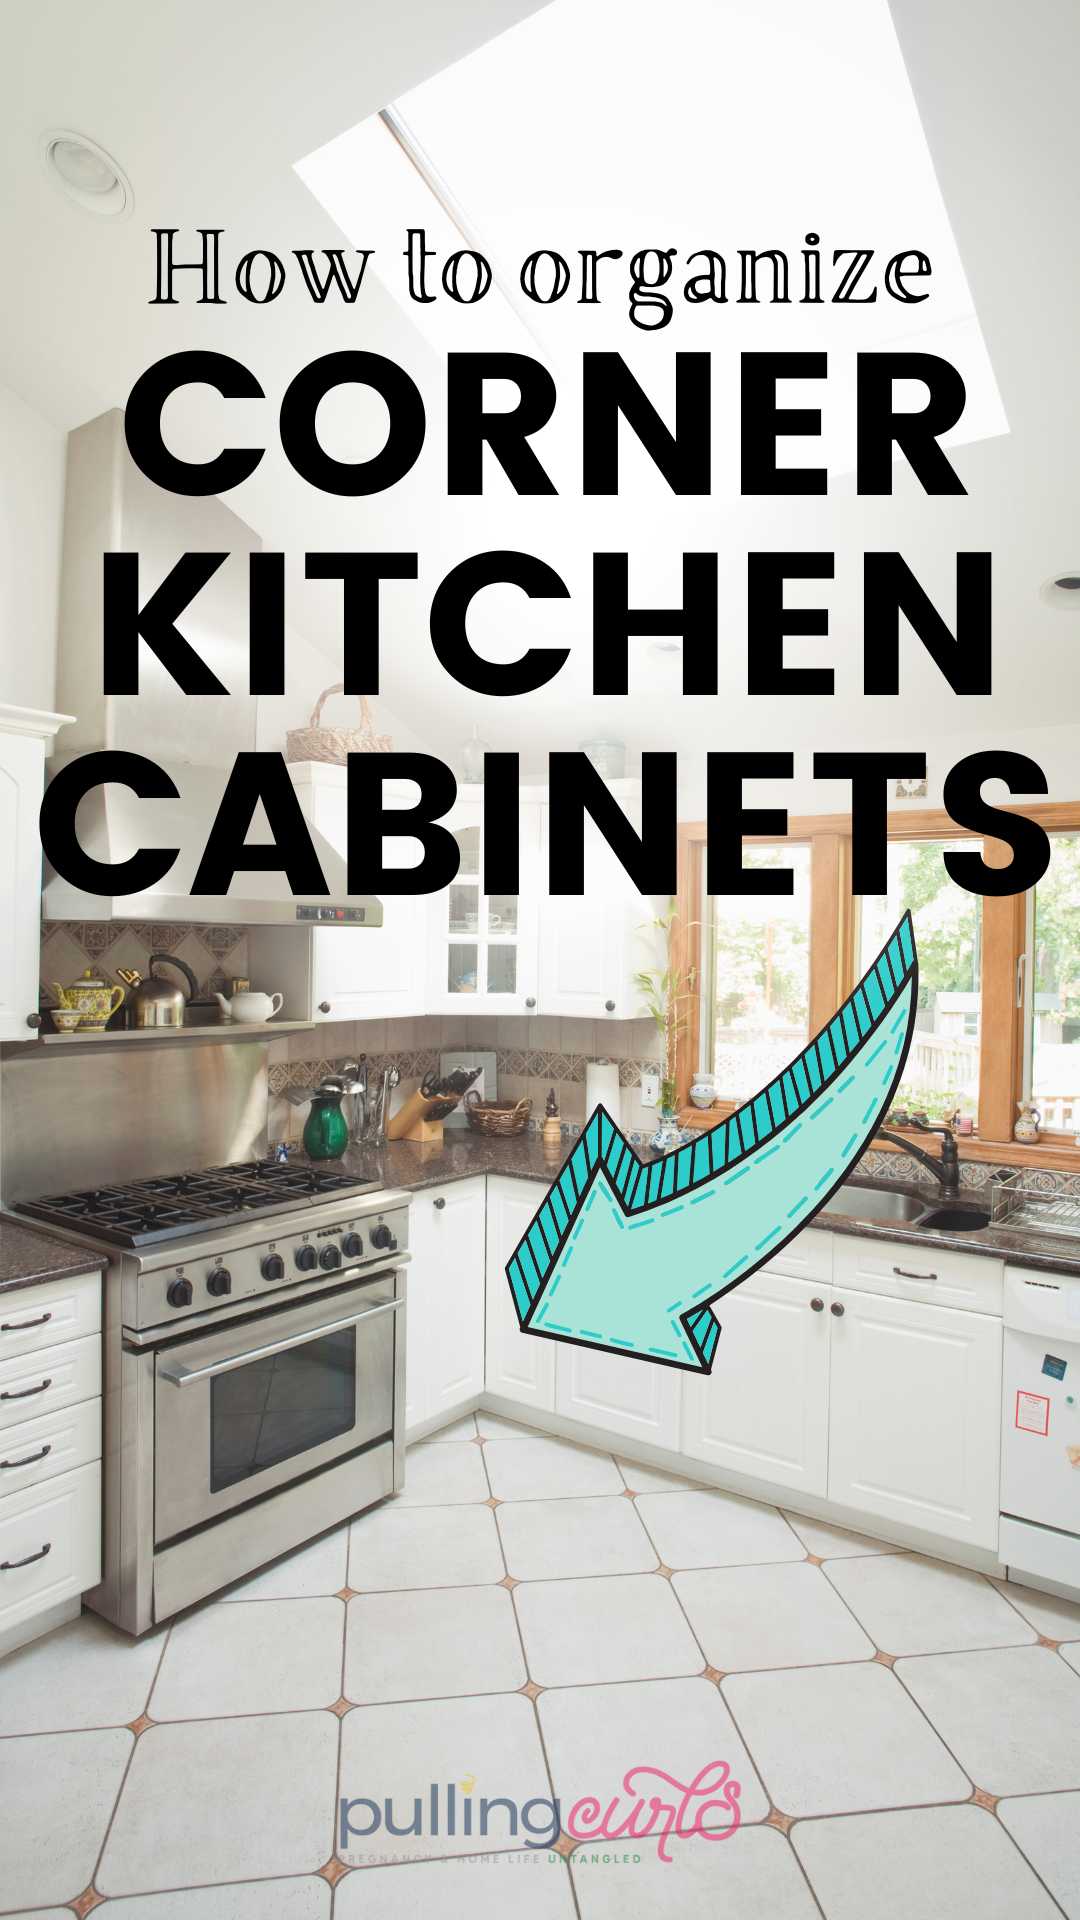 Corner kitchen cabinet organization can be tricky. Do you have that awkward corner cabinet and lazy susans won't help? These simple steps might help you keep organized! via @pullingcurls